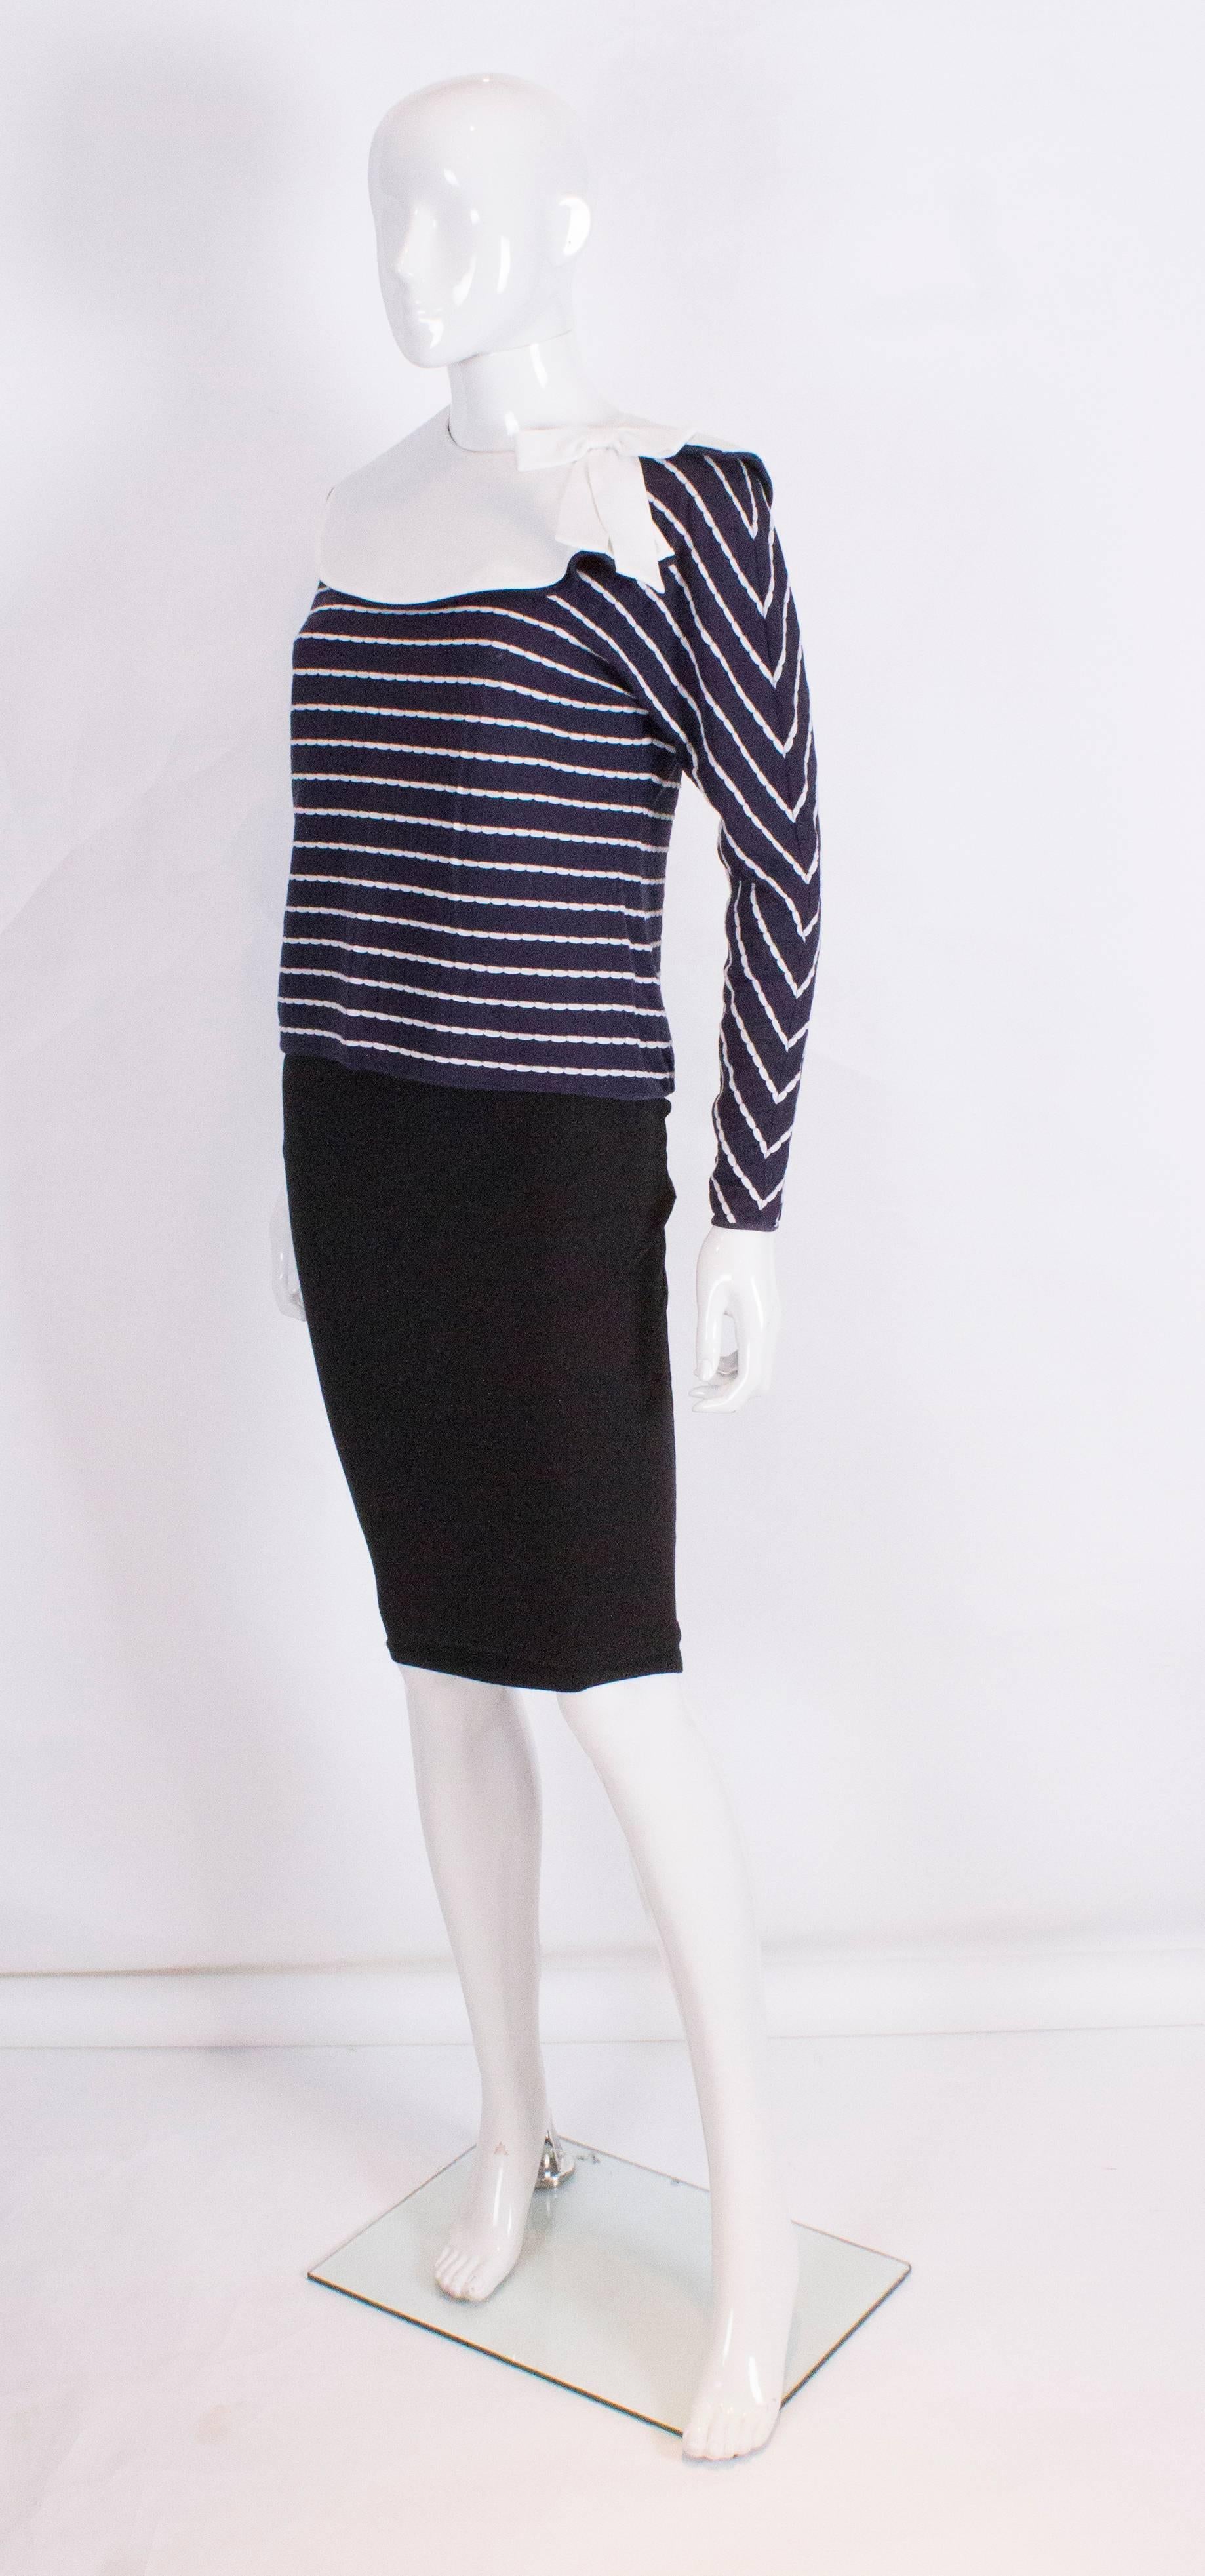 A chic blue and white top by Valentino with detachable white collar. The top is blue with white horizontal stripe and has a detachable blue and white detachable collar with a bow.